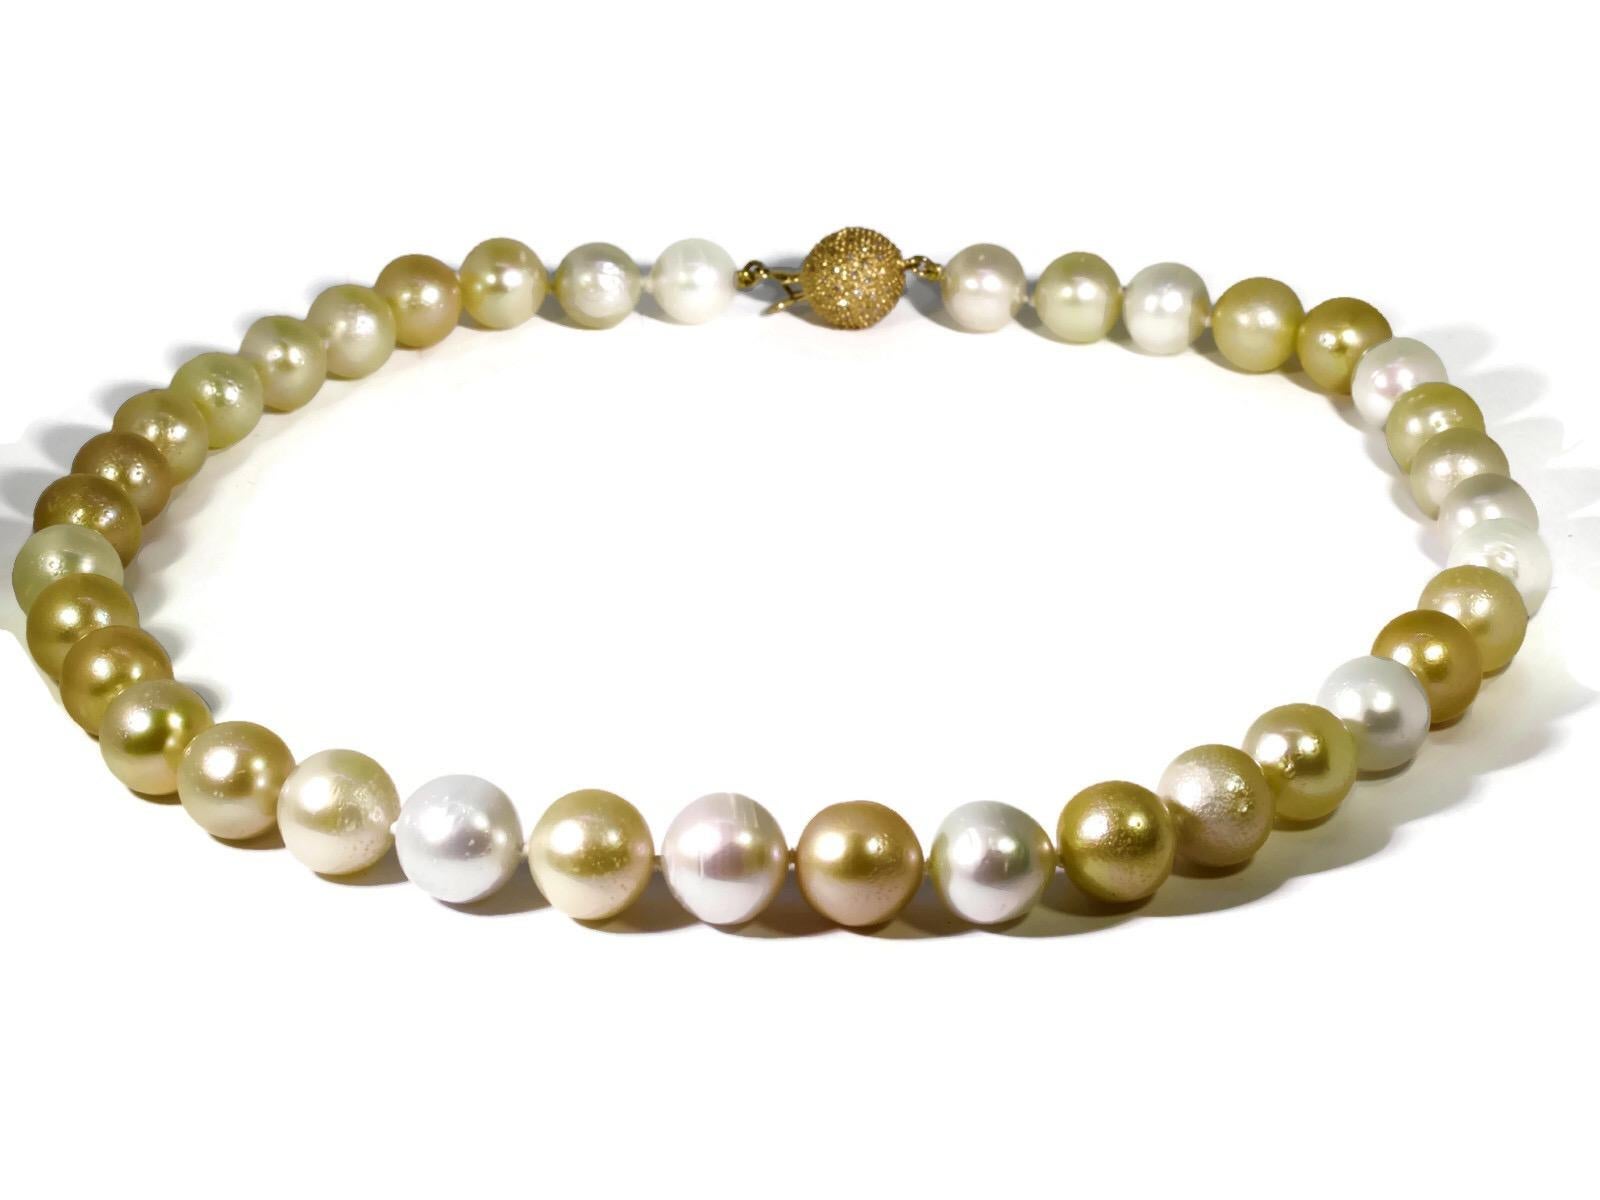 Women's Golden and White South Sea Pearl Necklace with a 14 Karat Gold Diamond Clasp For Sale